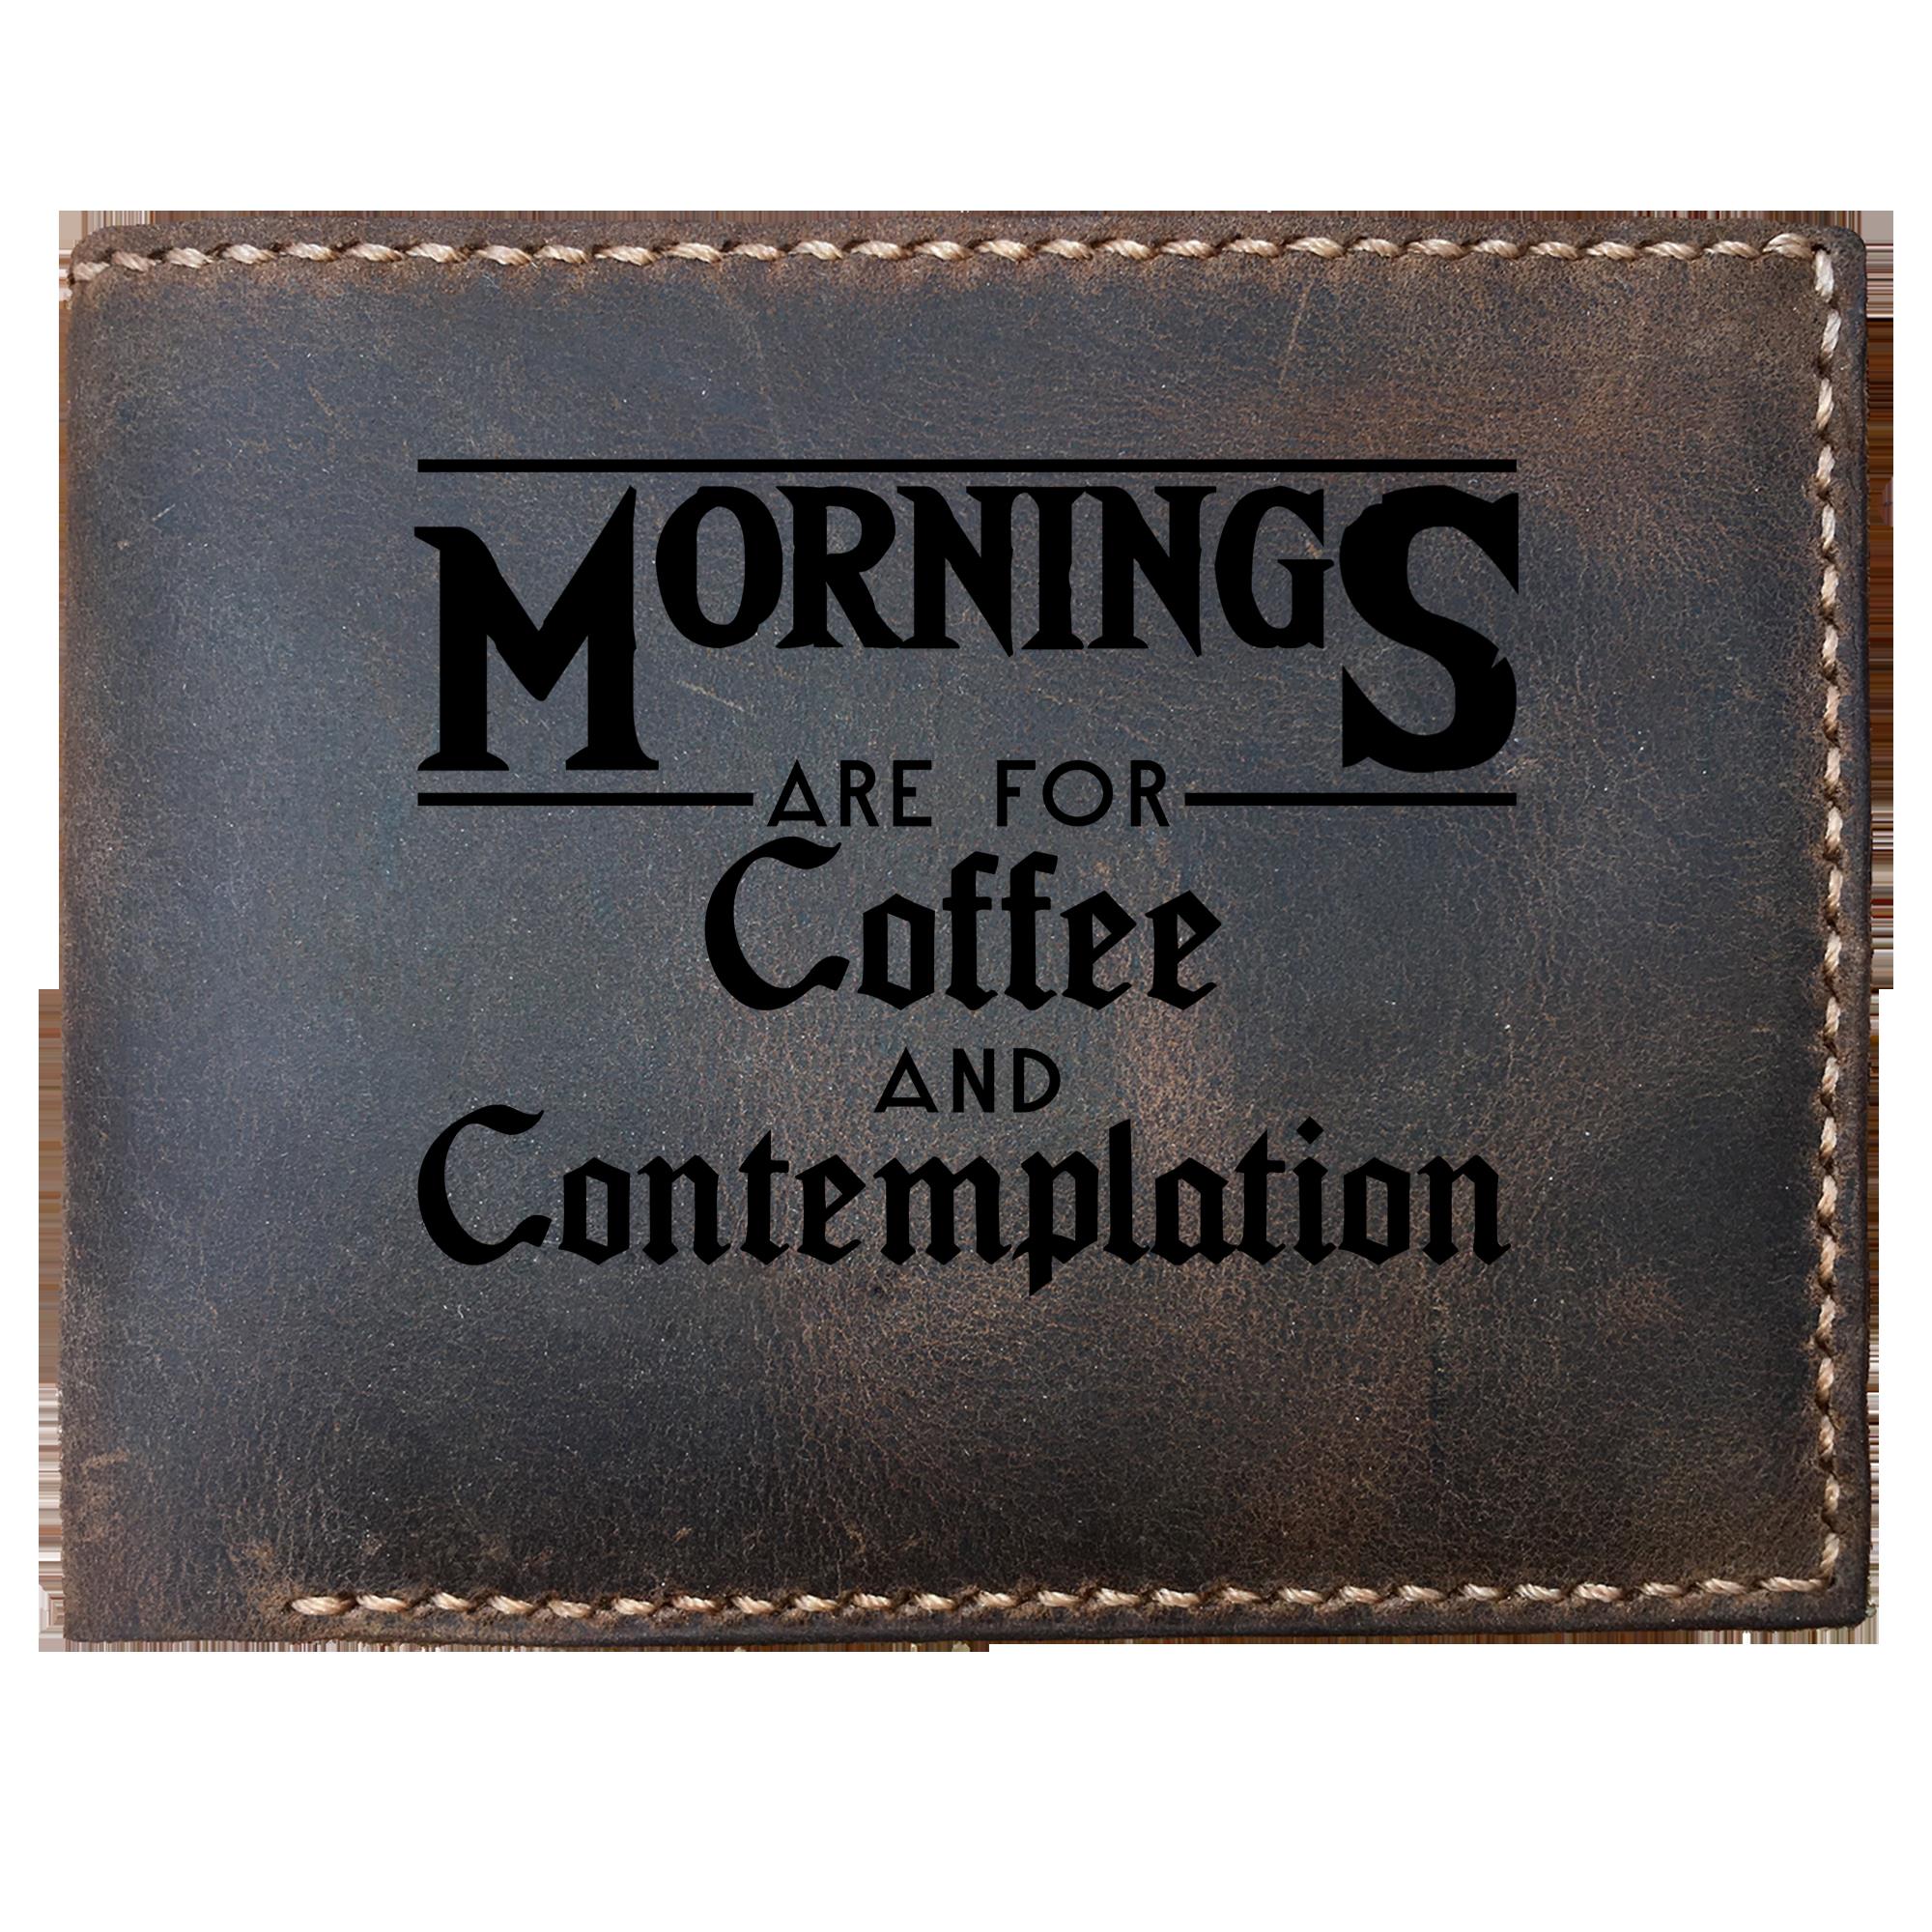 Skitongifts Funny Custom Laser Engraved Bifold Leather Wallet For Men, Mornings Are For Coffee And Contemplation